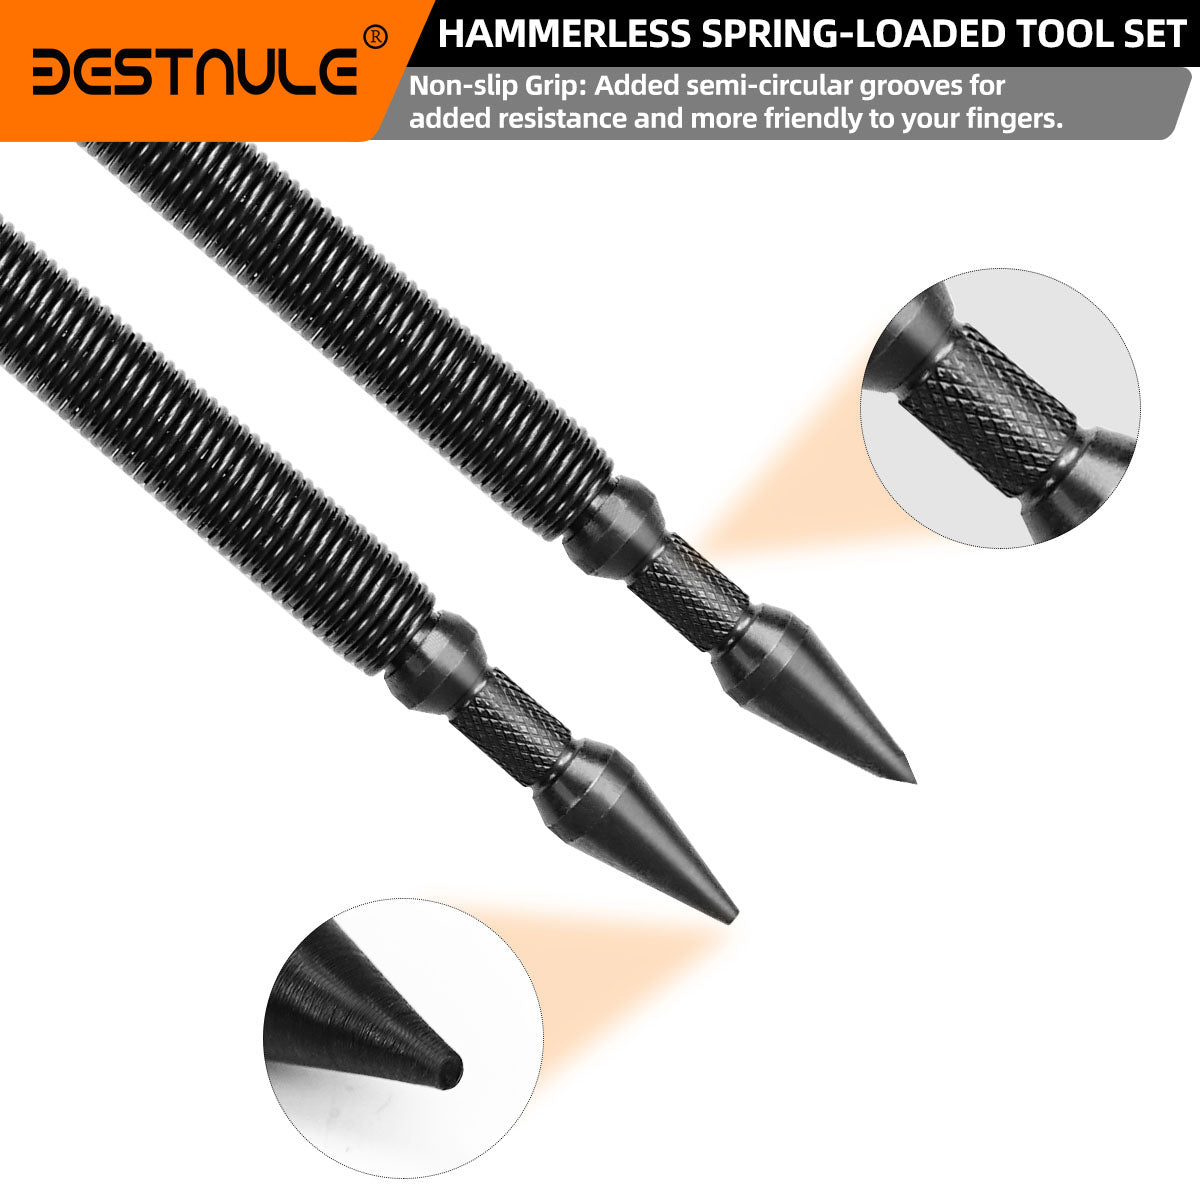 BESTNULE 5-Piece Nail Setter Dual Head Nail Set & Dual Head Center Punch & Hinge Pin Remover Punch Set, Spring Loaded Center Hole Punch, Nail Setter Features 1/8-in, 3/32-in, 3/16-in, 1/16-in, 1/32-in